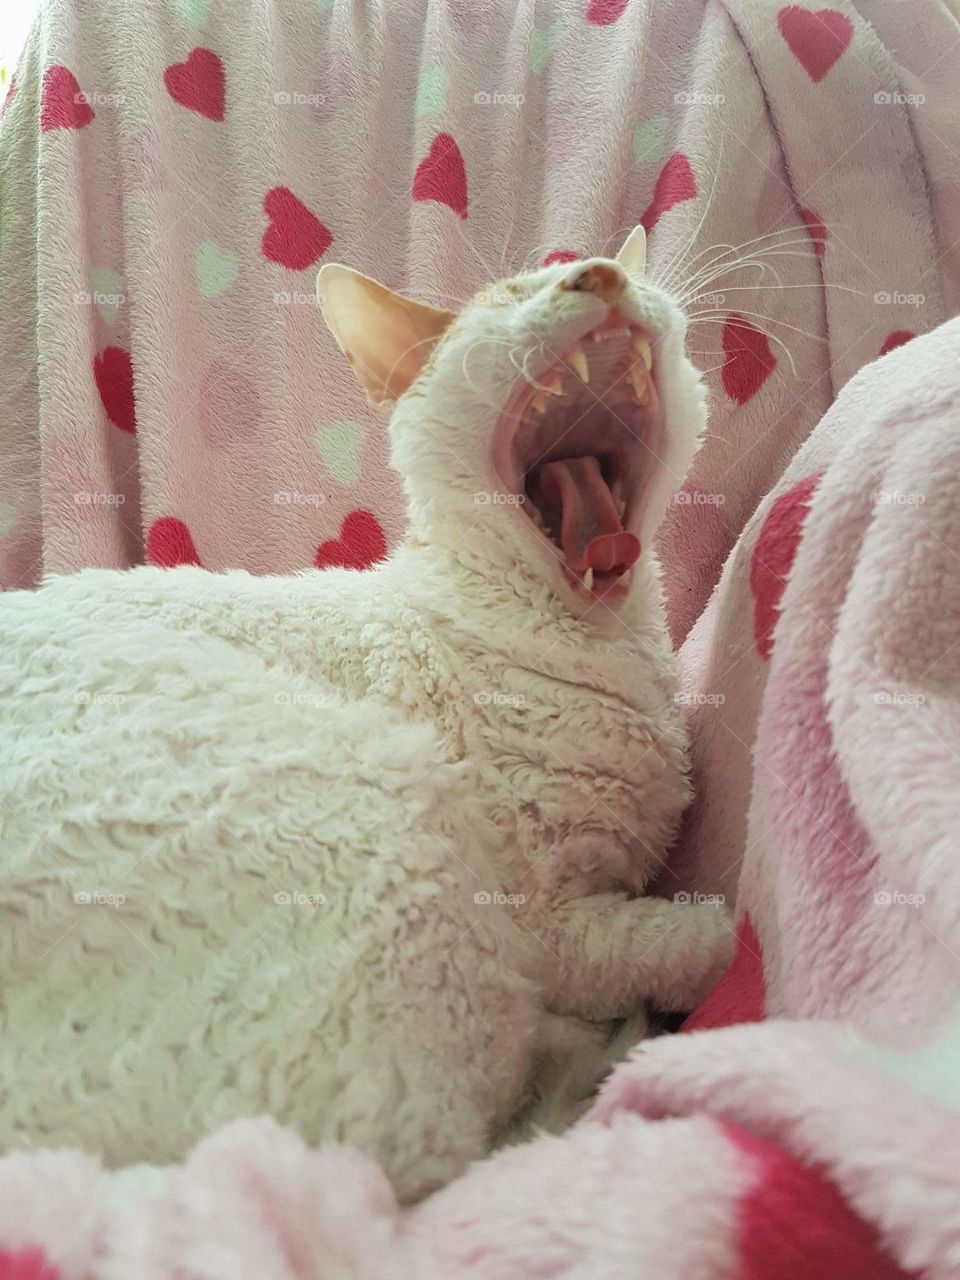 cat yawning after waking up from a comforting nap during a rainy day